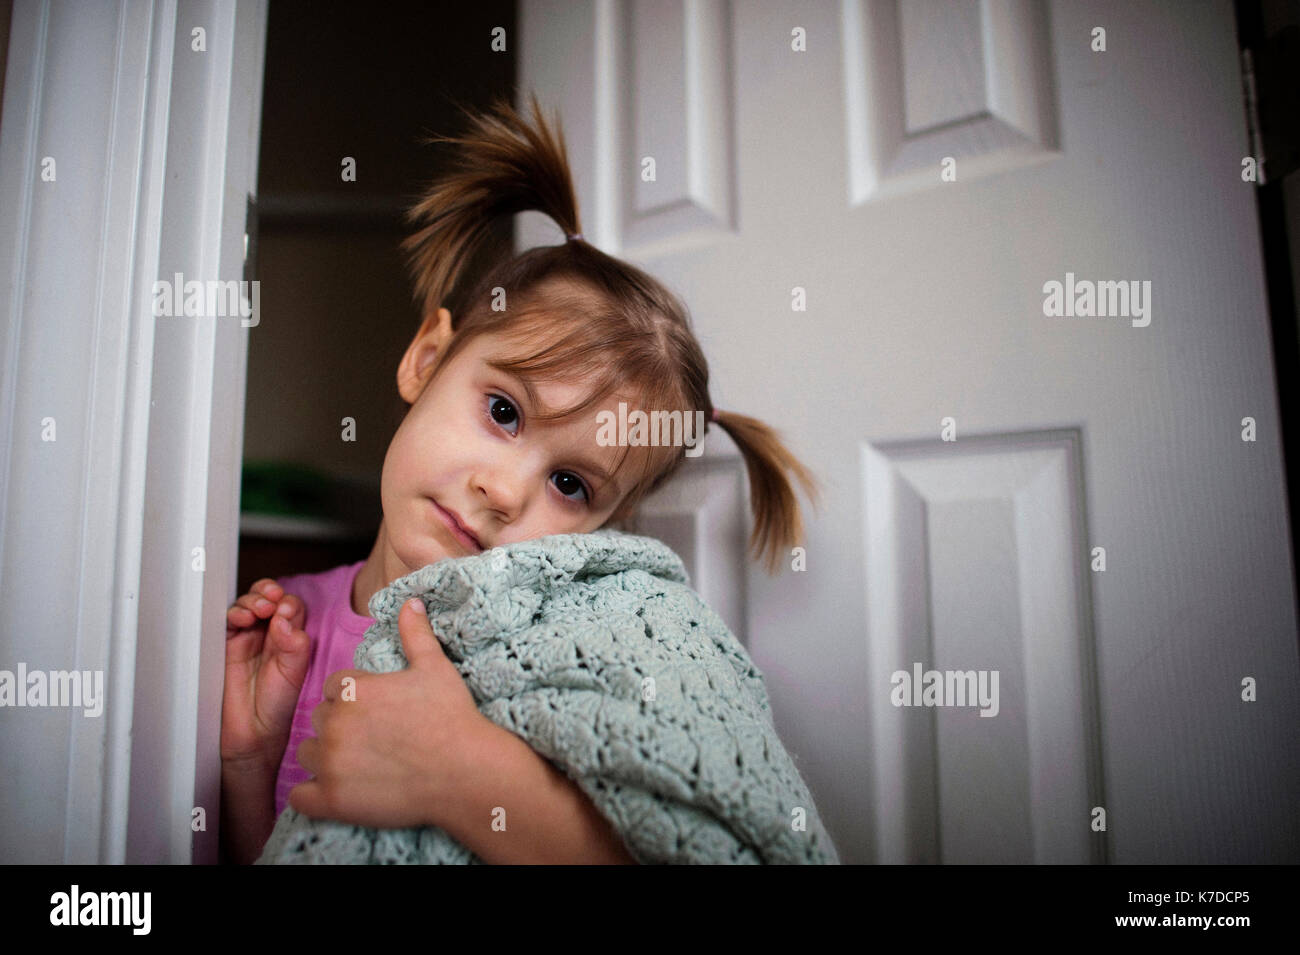 Portrait of girl holding shawl while standing at doorway Stock Photo